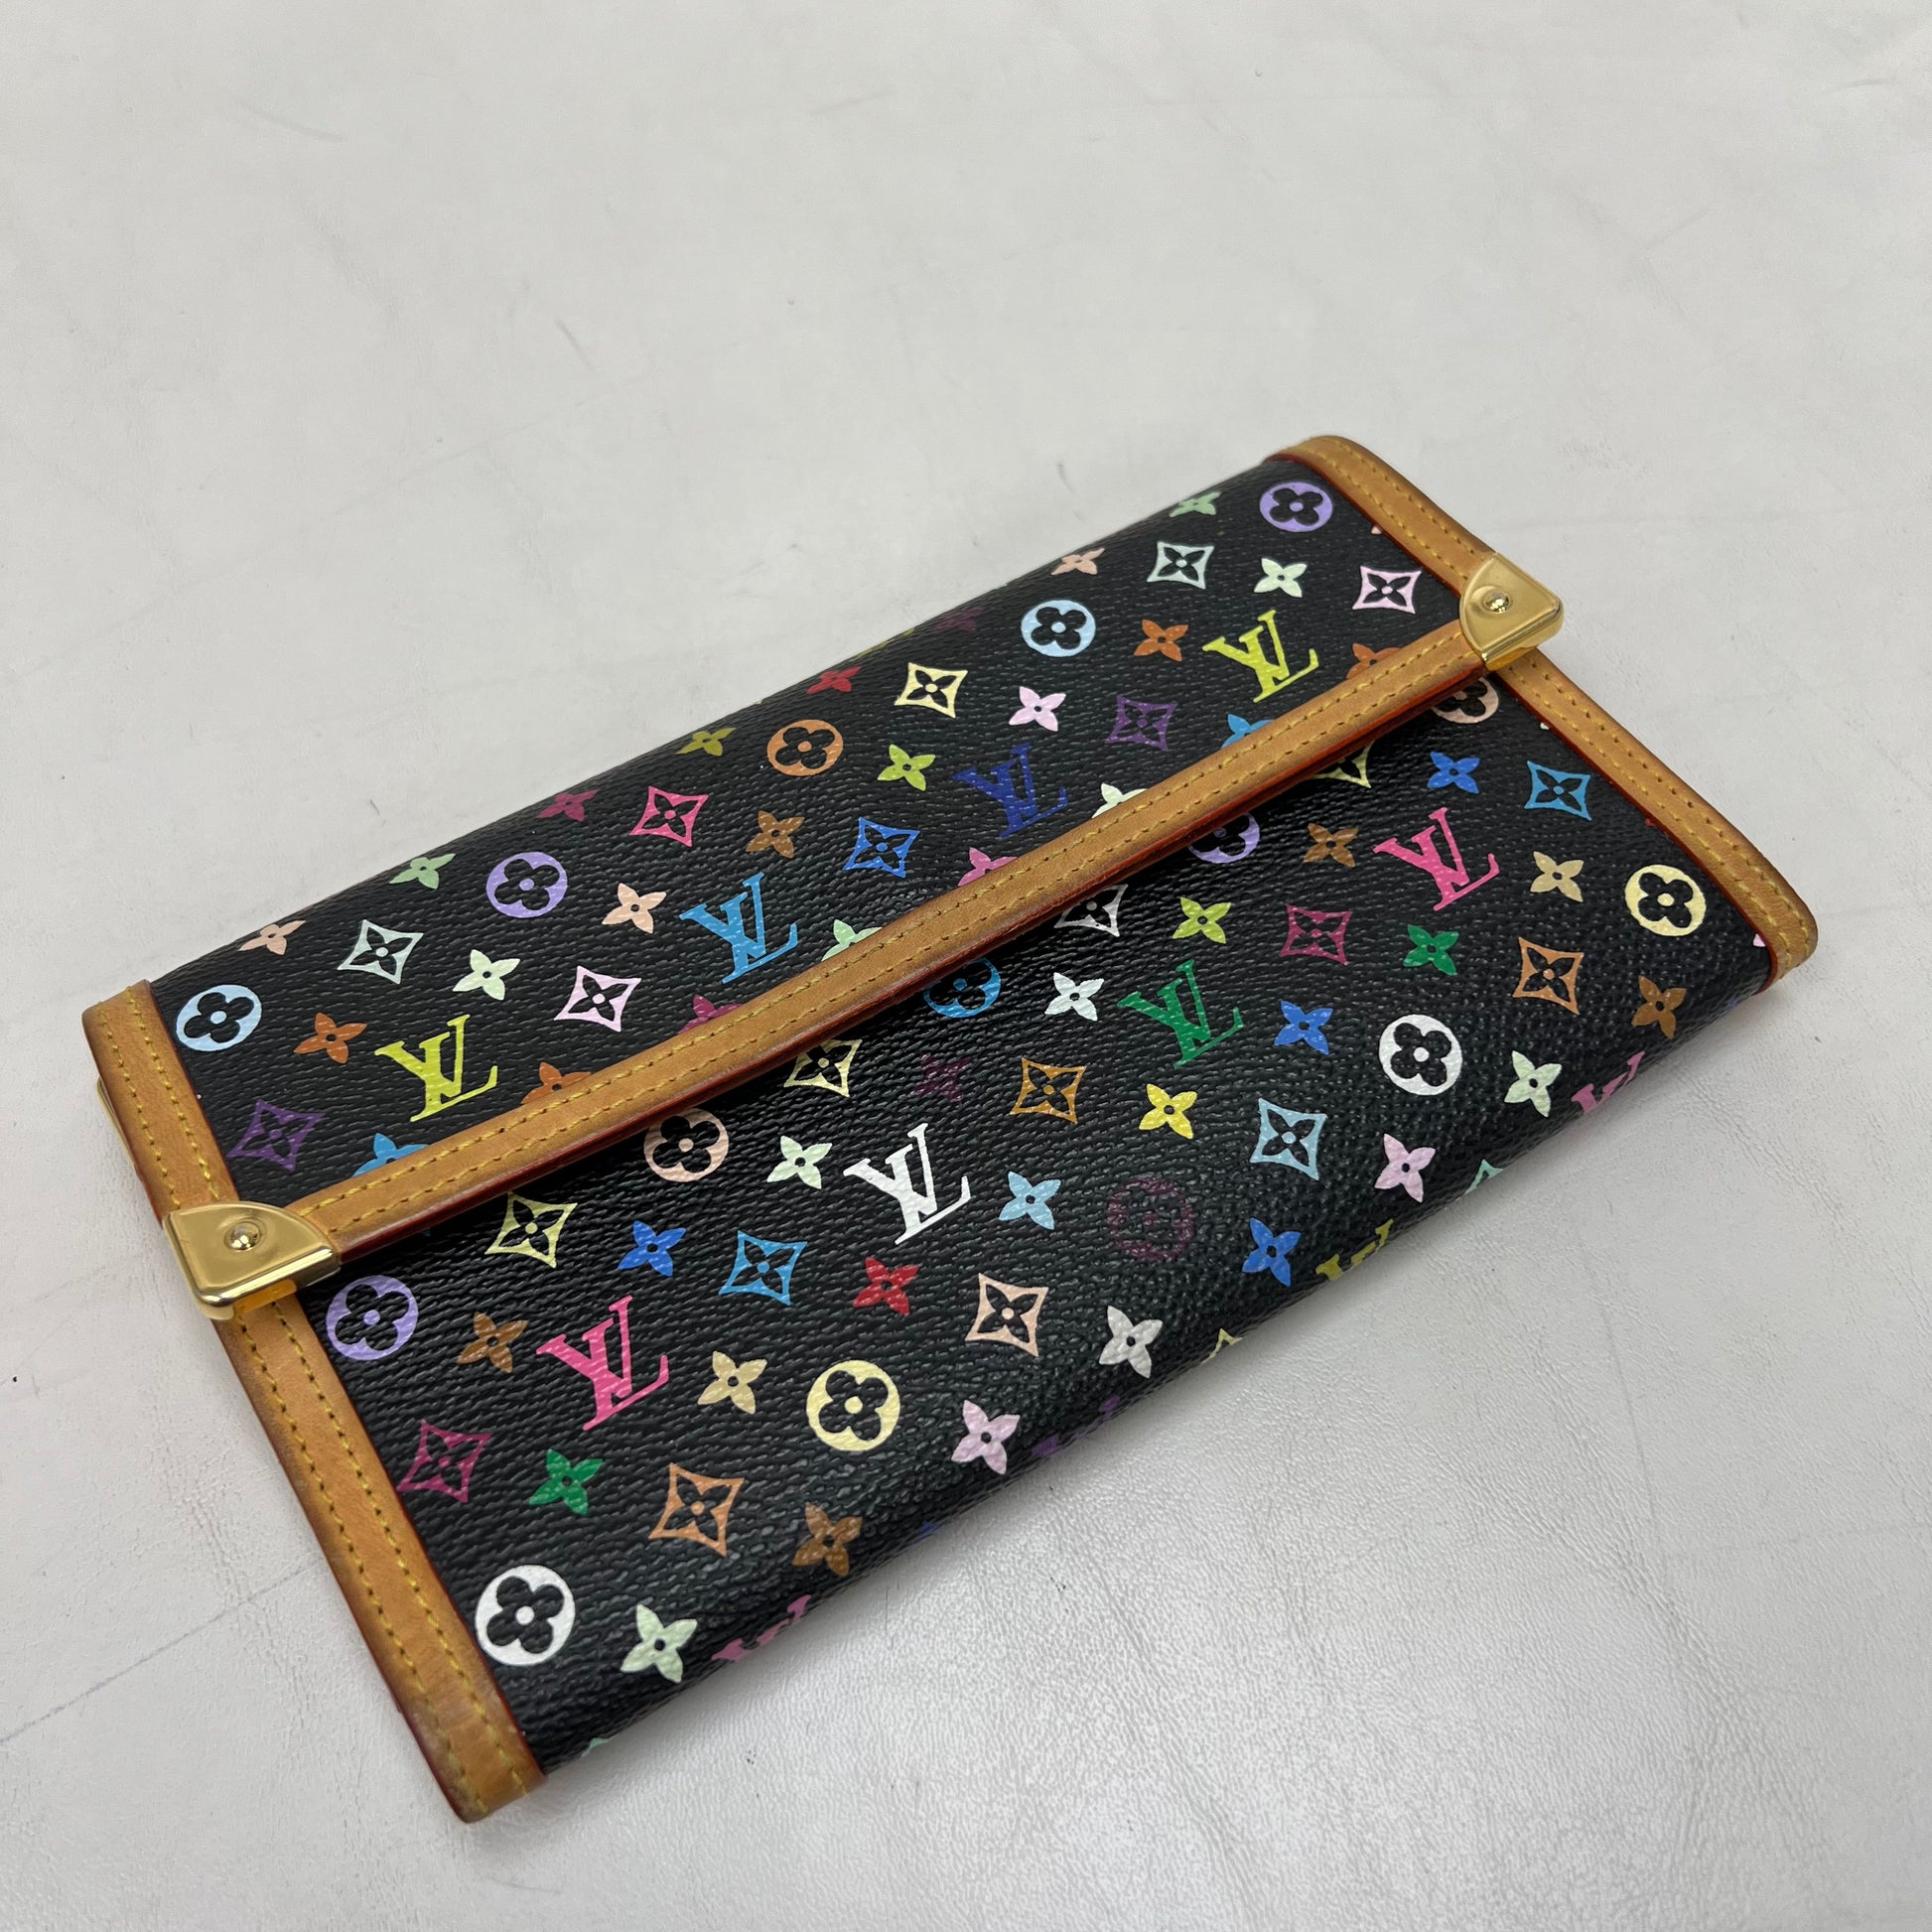 Authentic Louis Vuitton Monogram Tresor Wallet Guaranteed By What Goes  Around